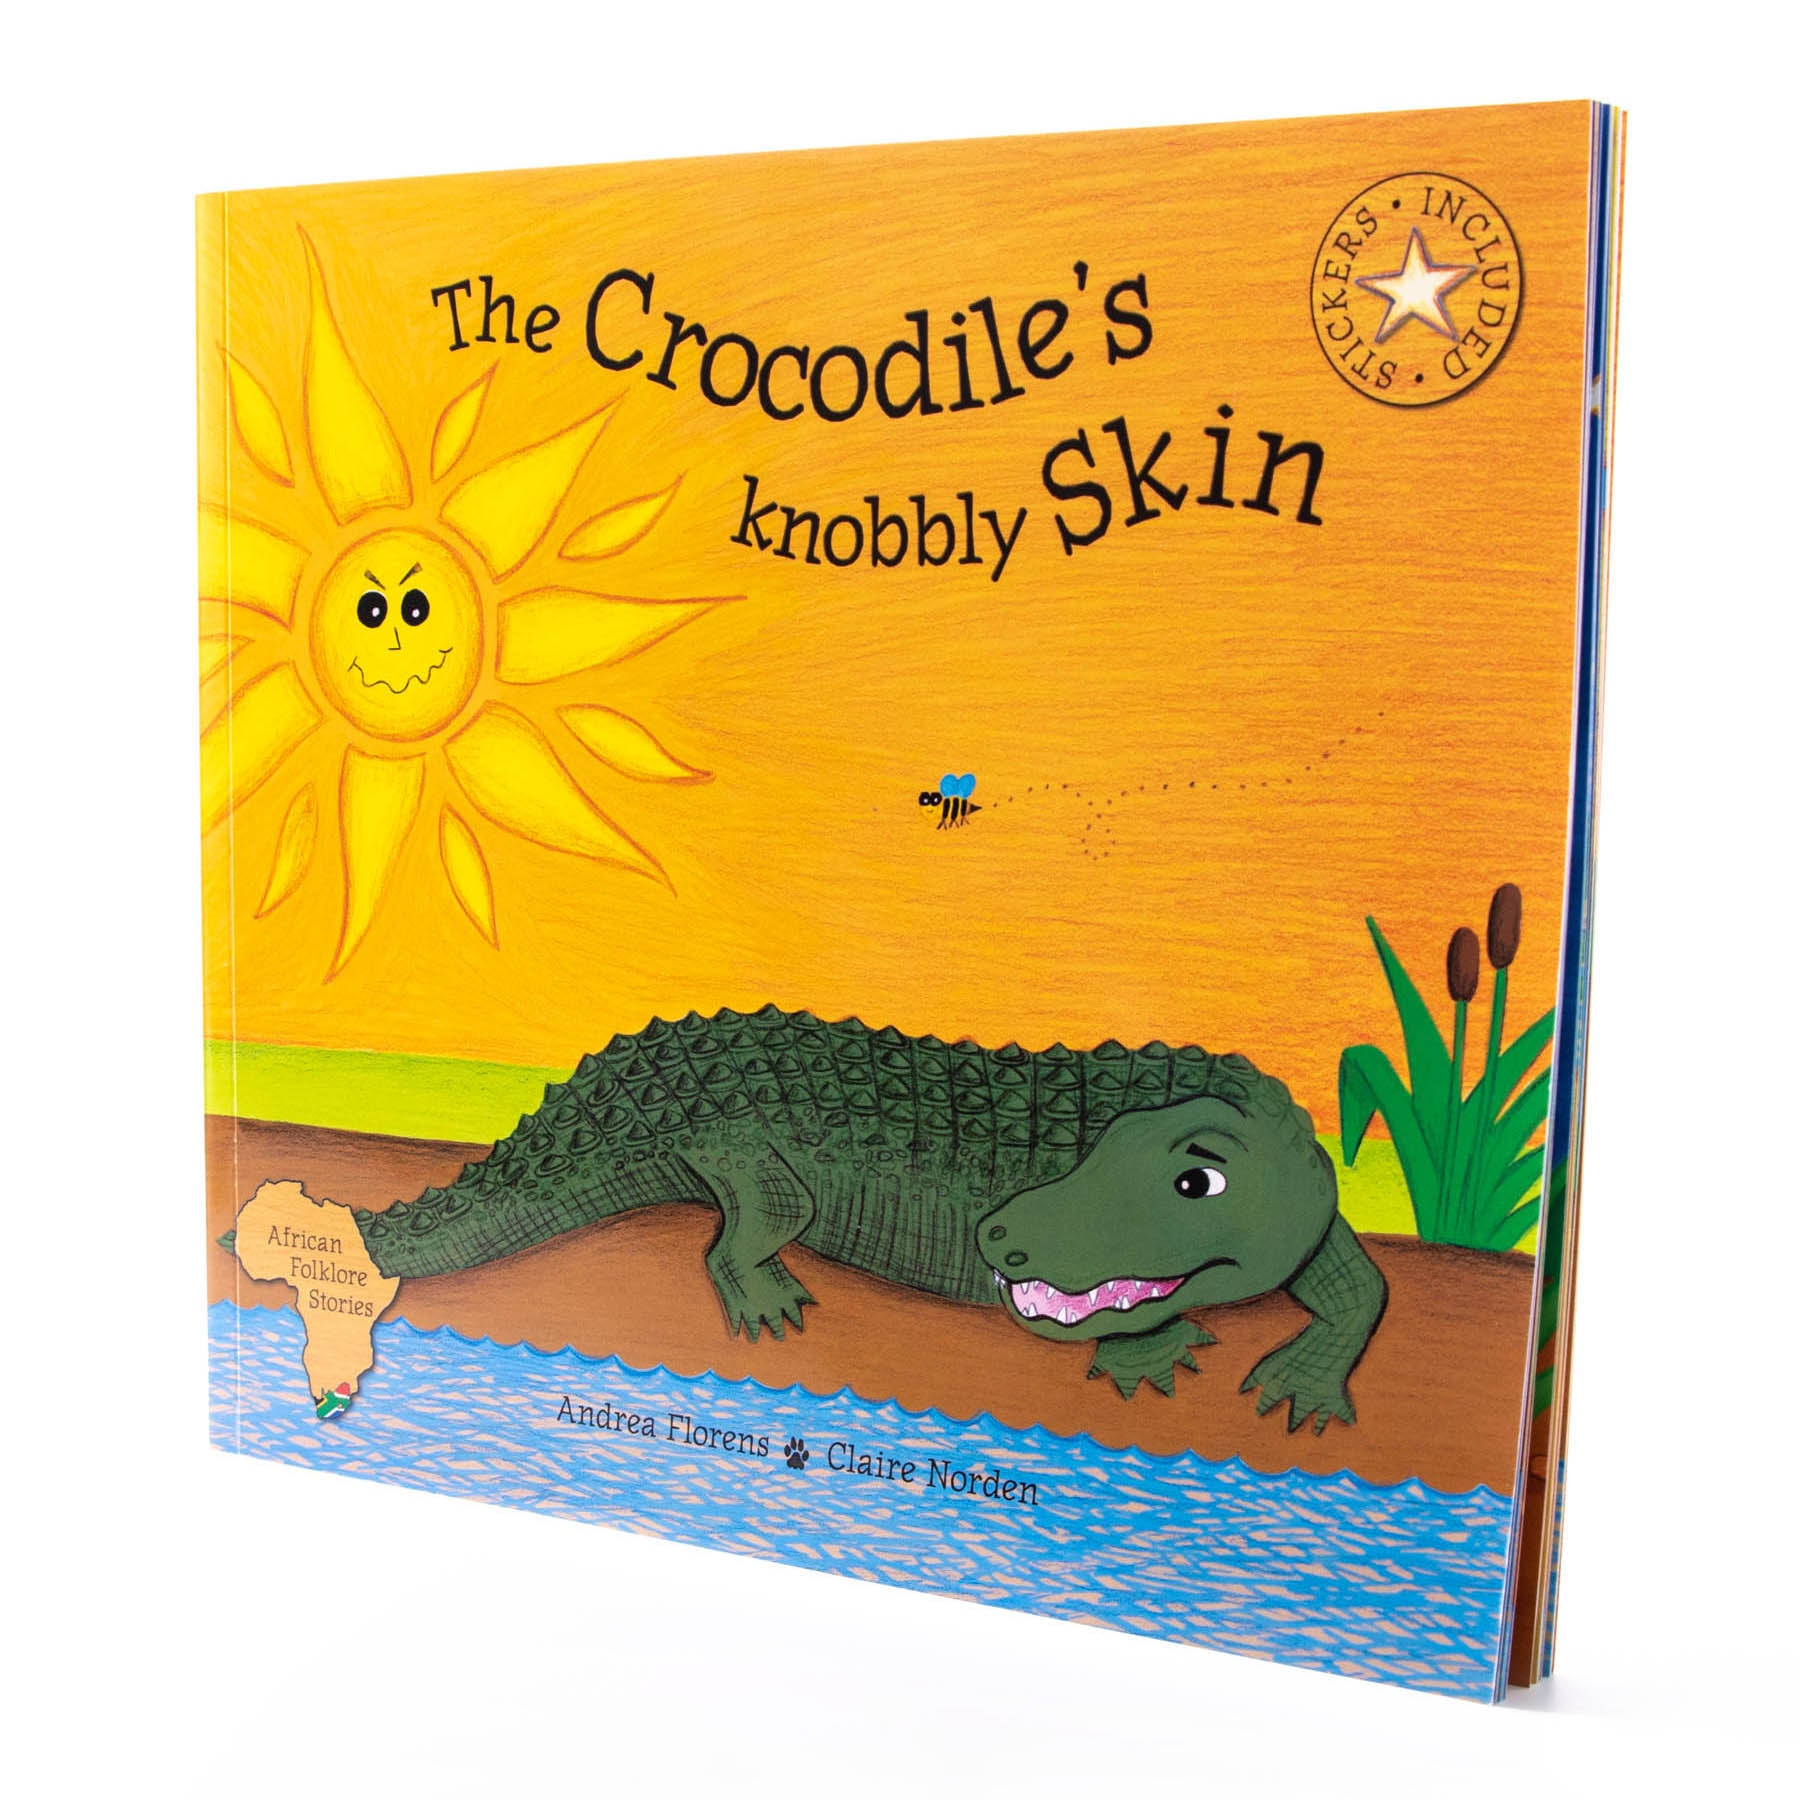 African Folklore Stories The Crocodile's knobbly Skin English Story Book